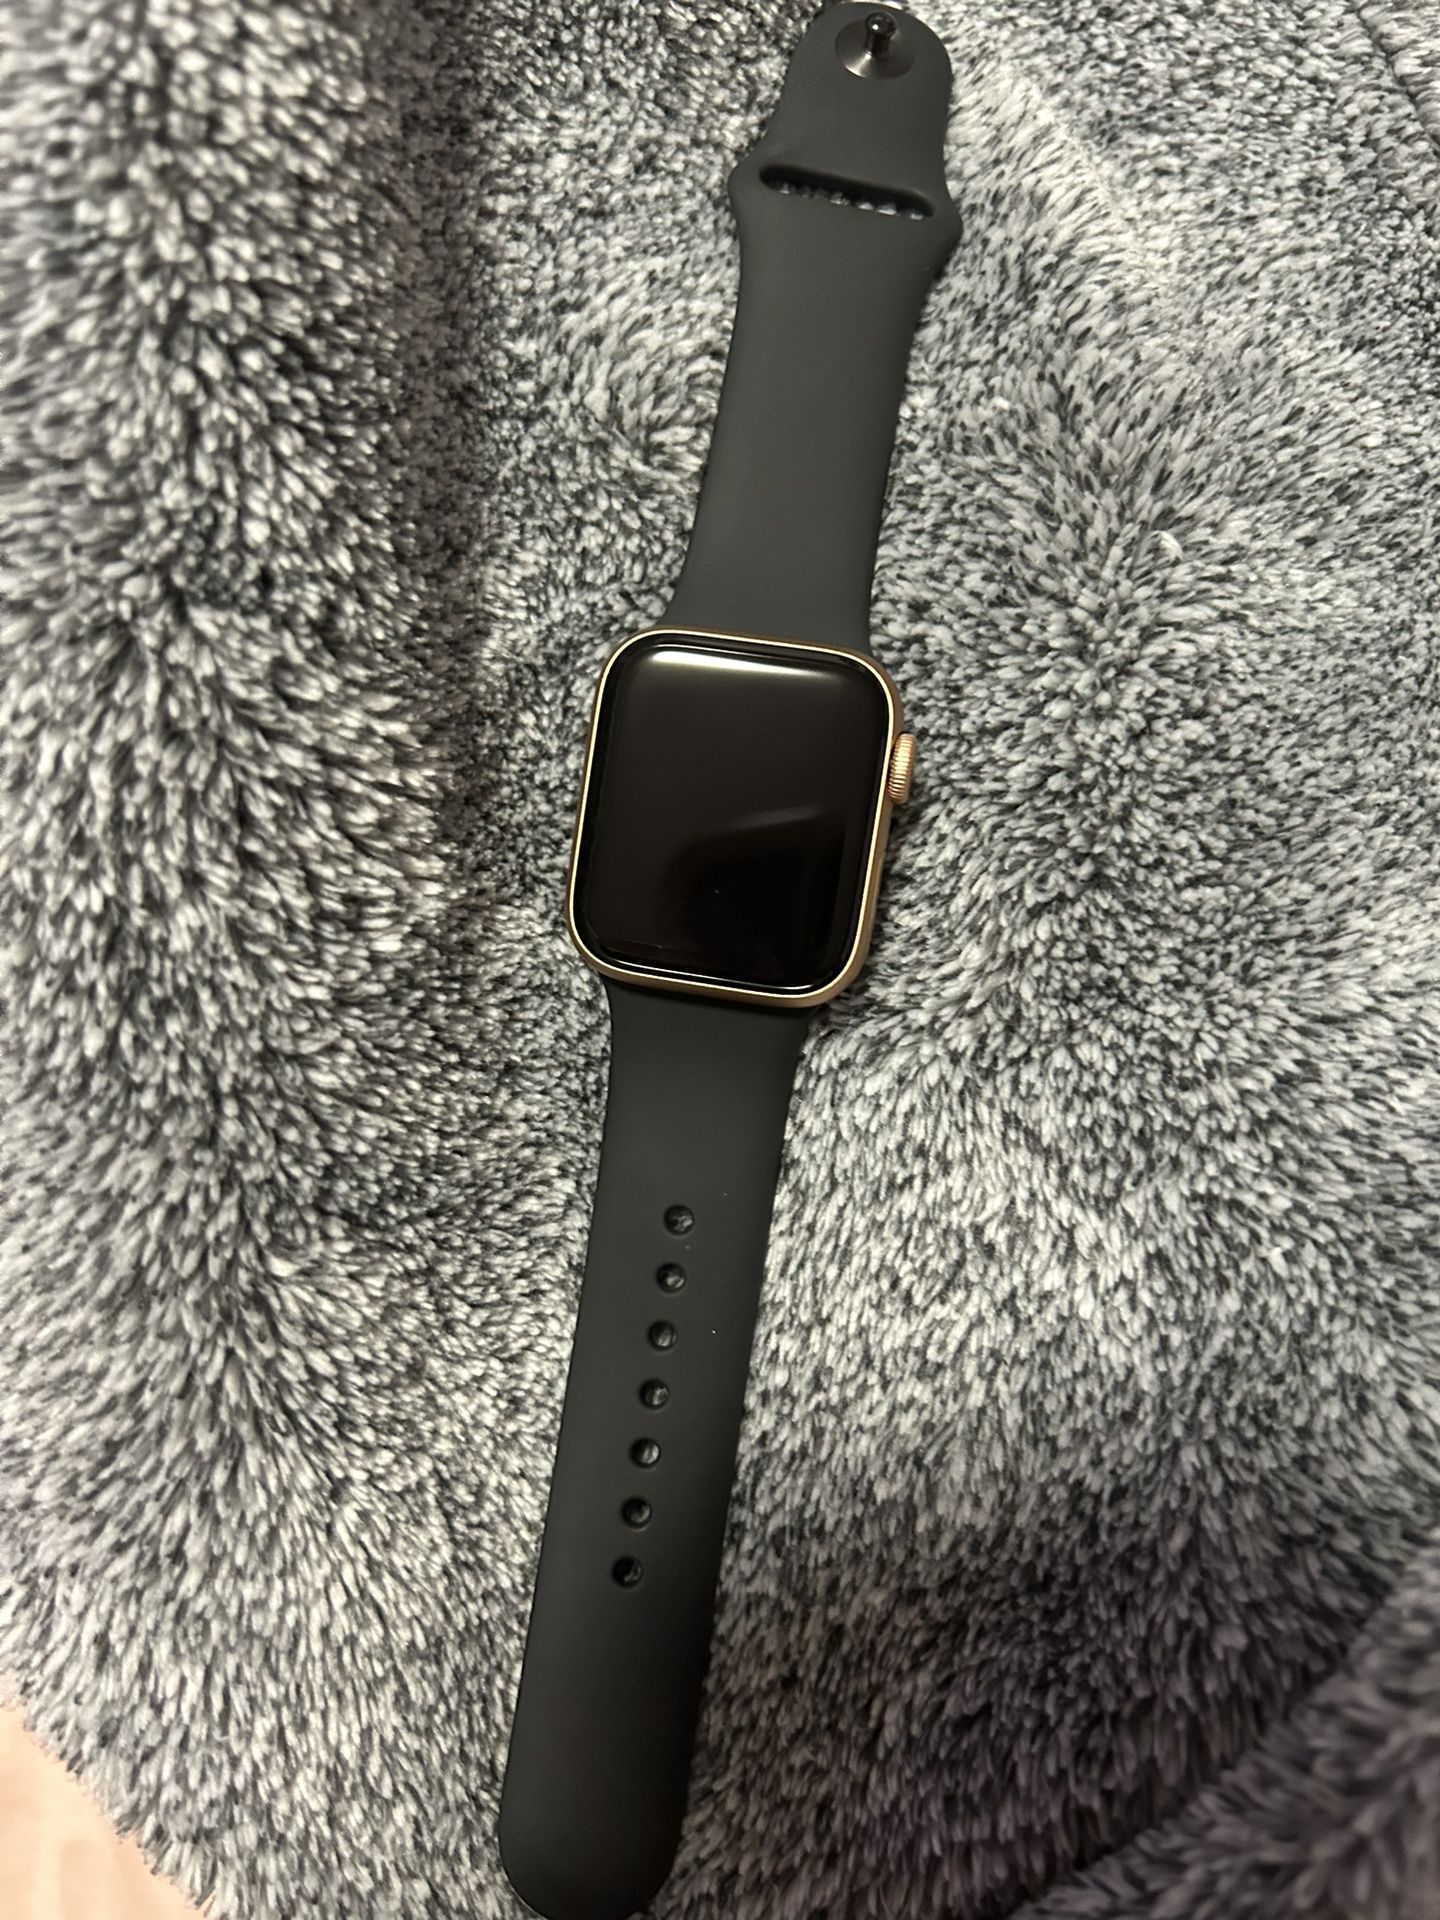 Series 4 Apple Watch (willing to lower price)